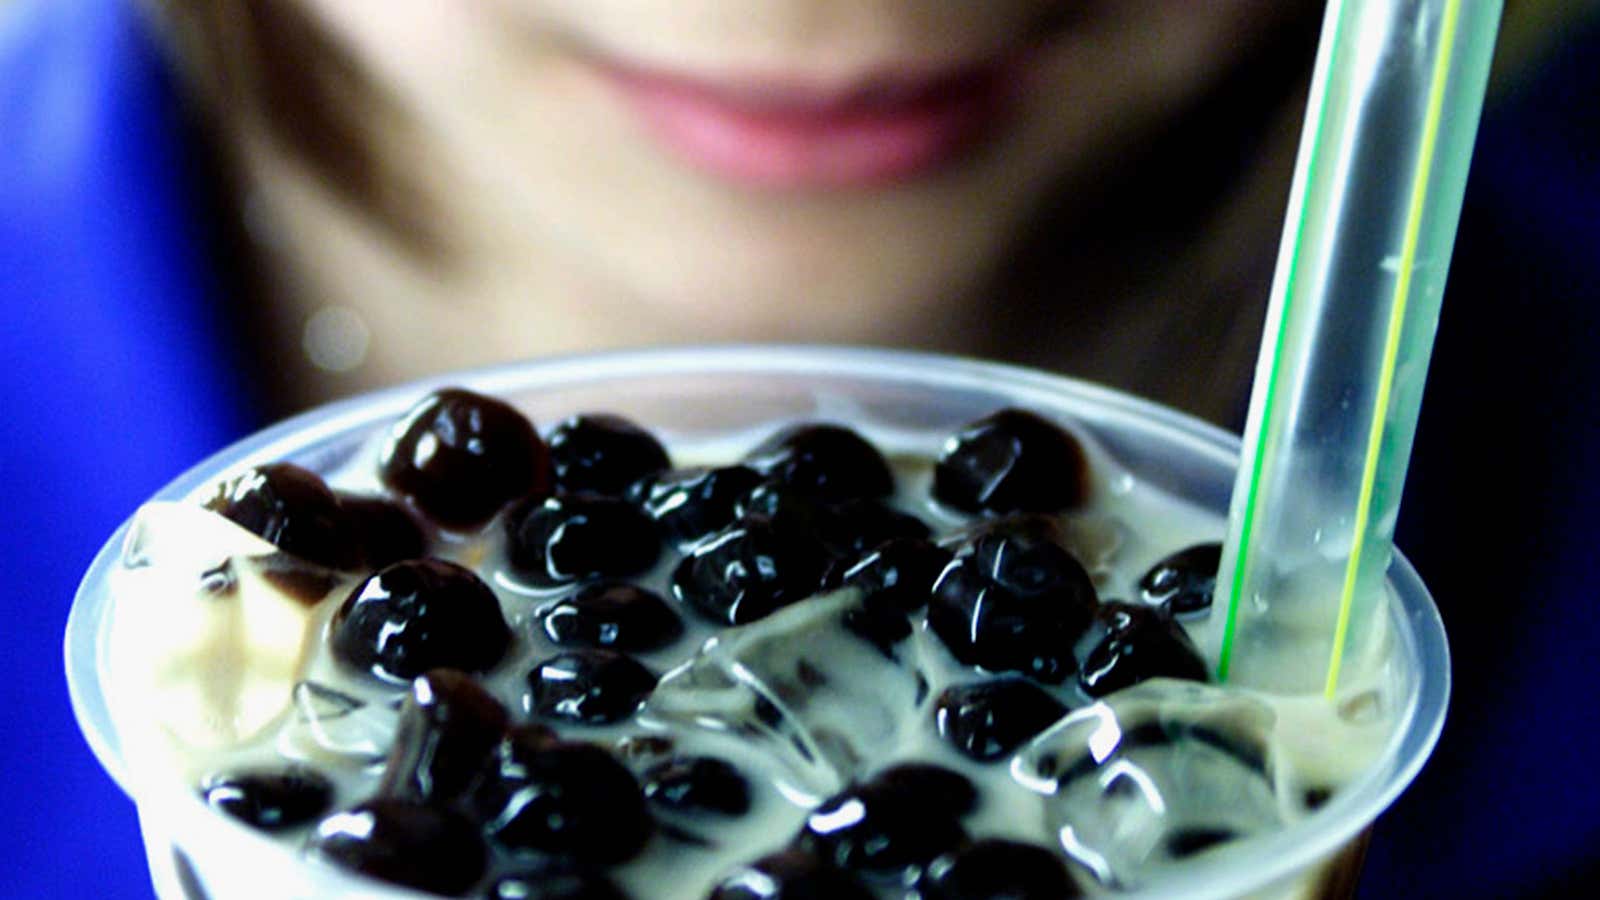 Bubble tea has been popular in the US for a while now.